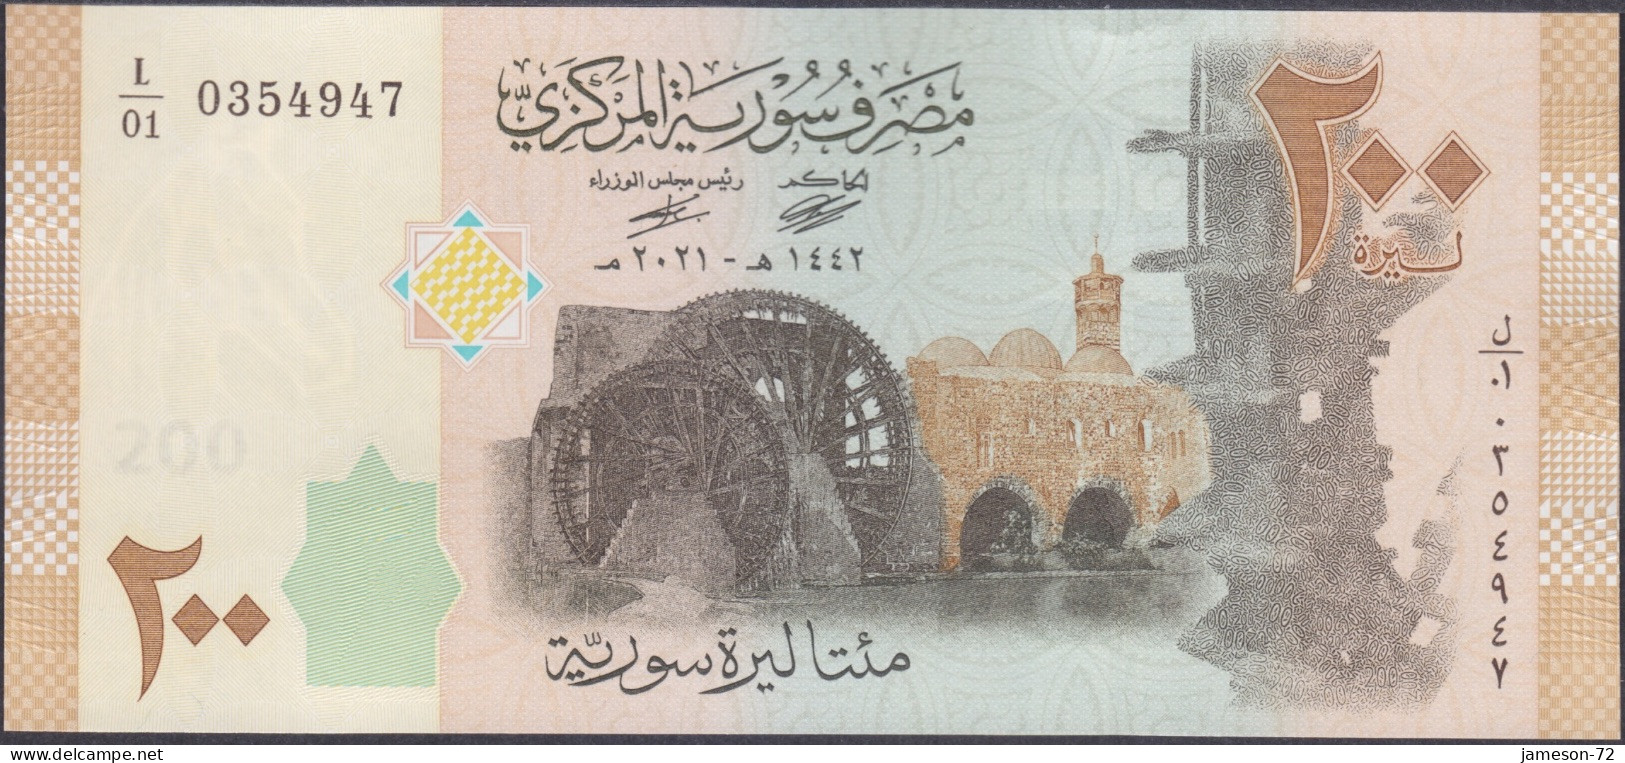 SYRIA - 200 Pounds AH1442 2021AD P# 114 Middle East Banknote - Edelweiss Coins - Syrie